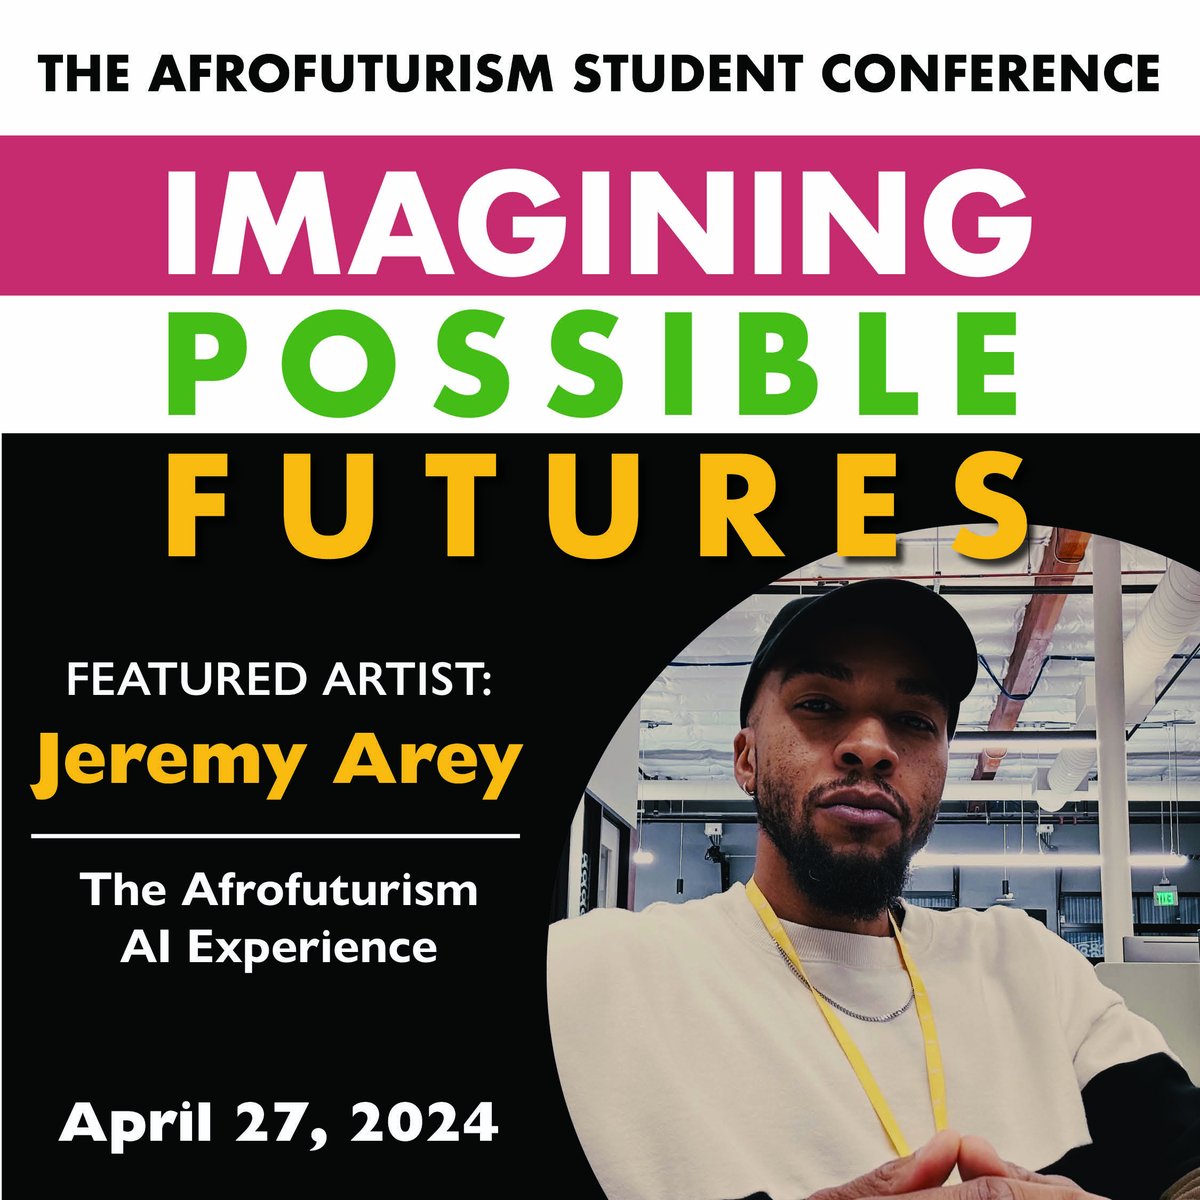 We're excited to have teaching artist Jeremy Arey lead students in exploring visual art using #artificialintelligence at our inaugural #Afrofuturism Student Conference! Learn more & invite your students to join us 4/27! smcoe.org/afrofuturism #BlackExcellence #JoinTheFuture